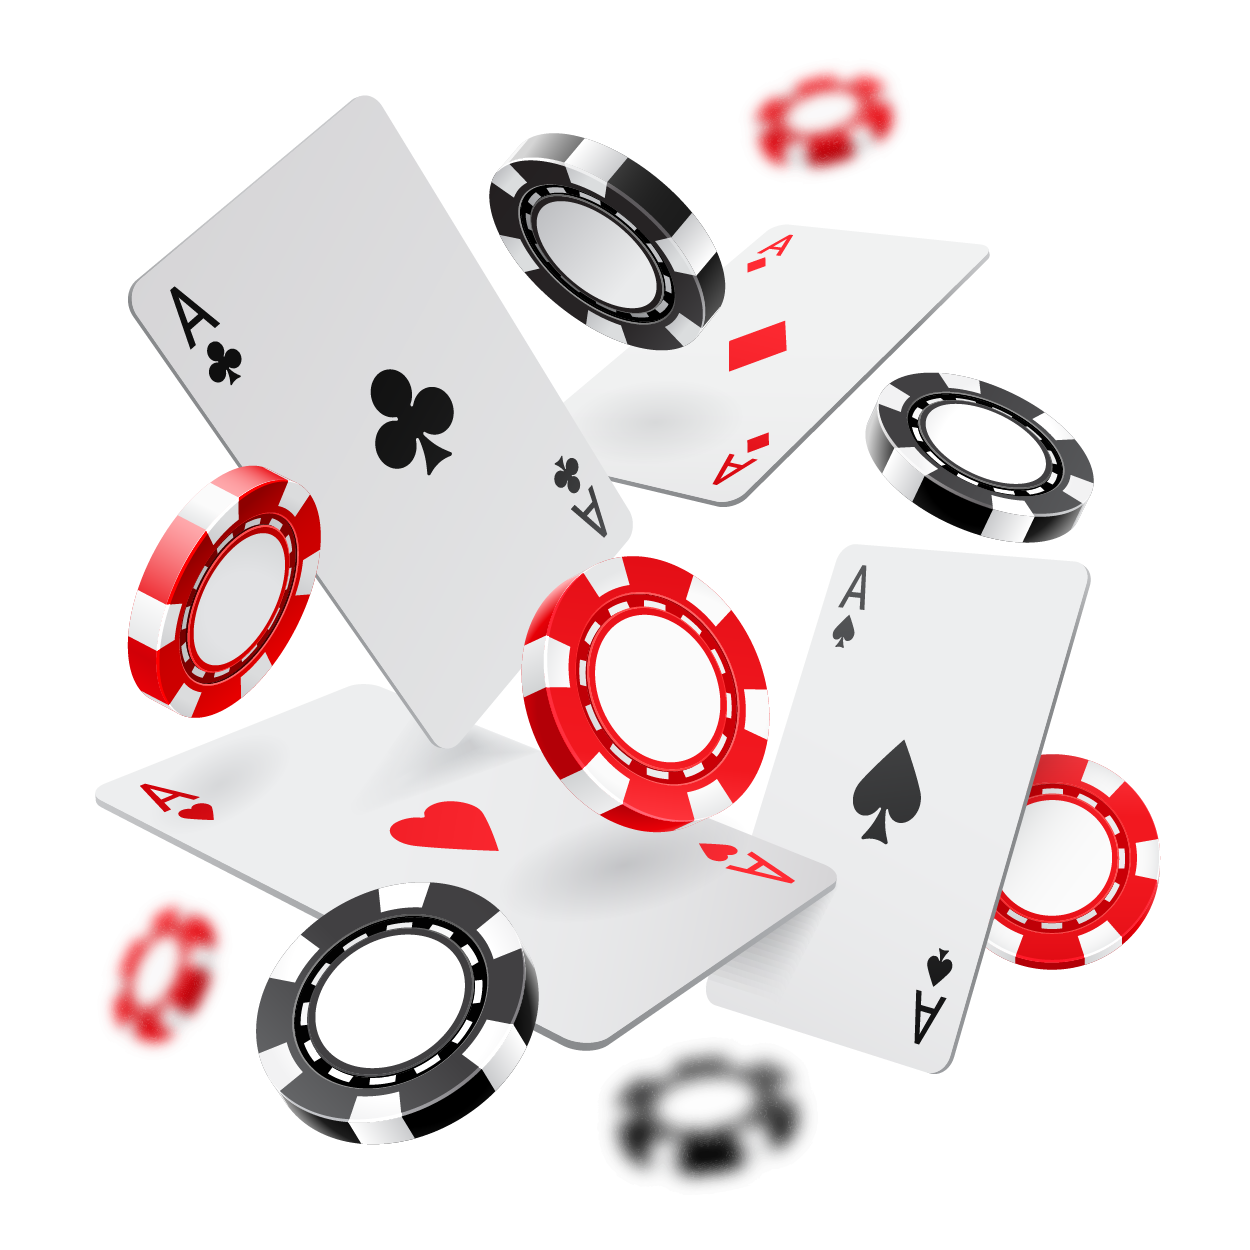 DoublePairs - Spice up your blackjack game with this exciting side